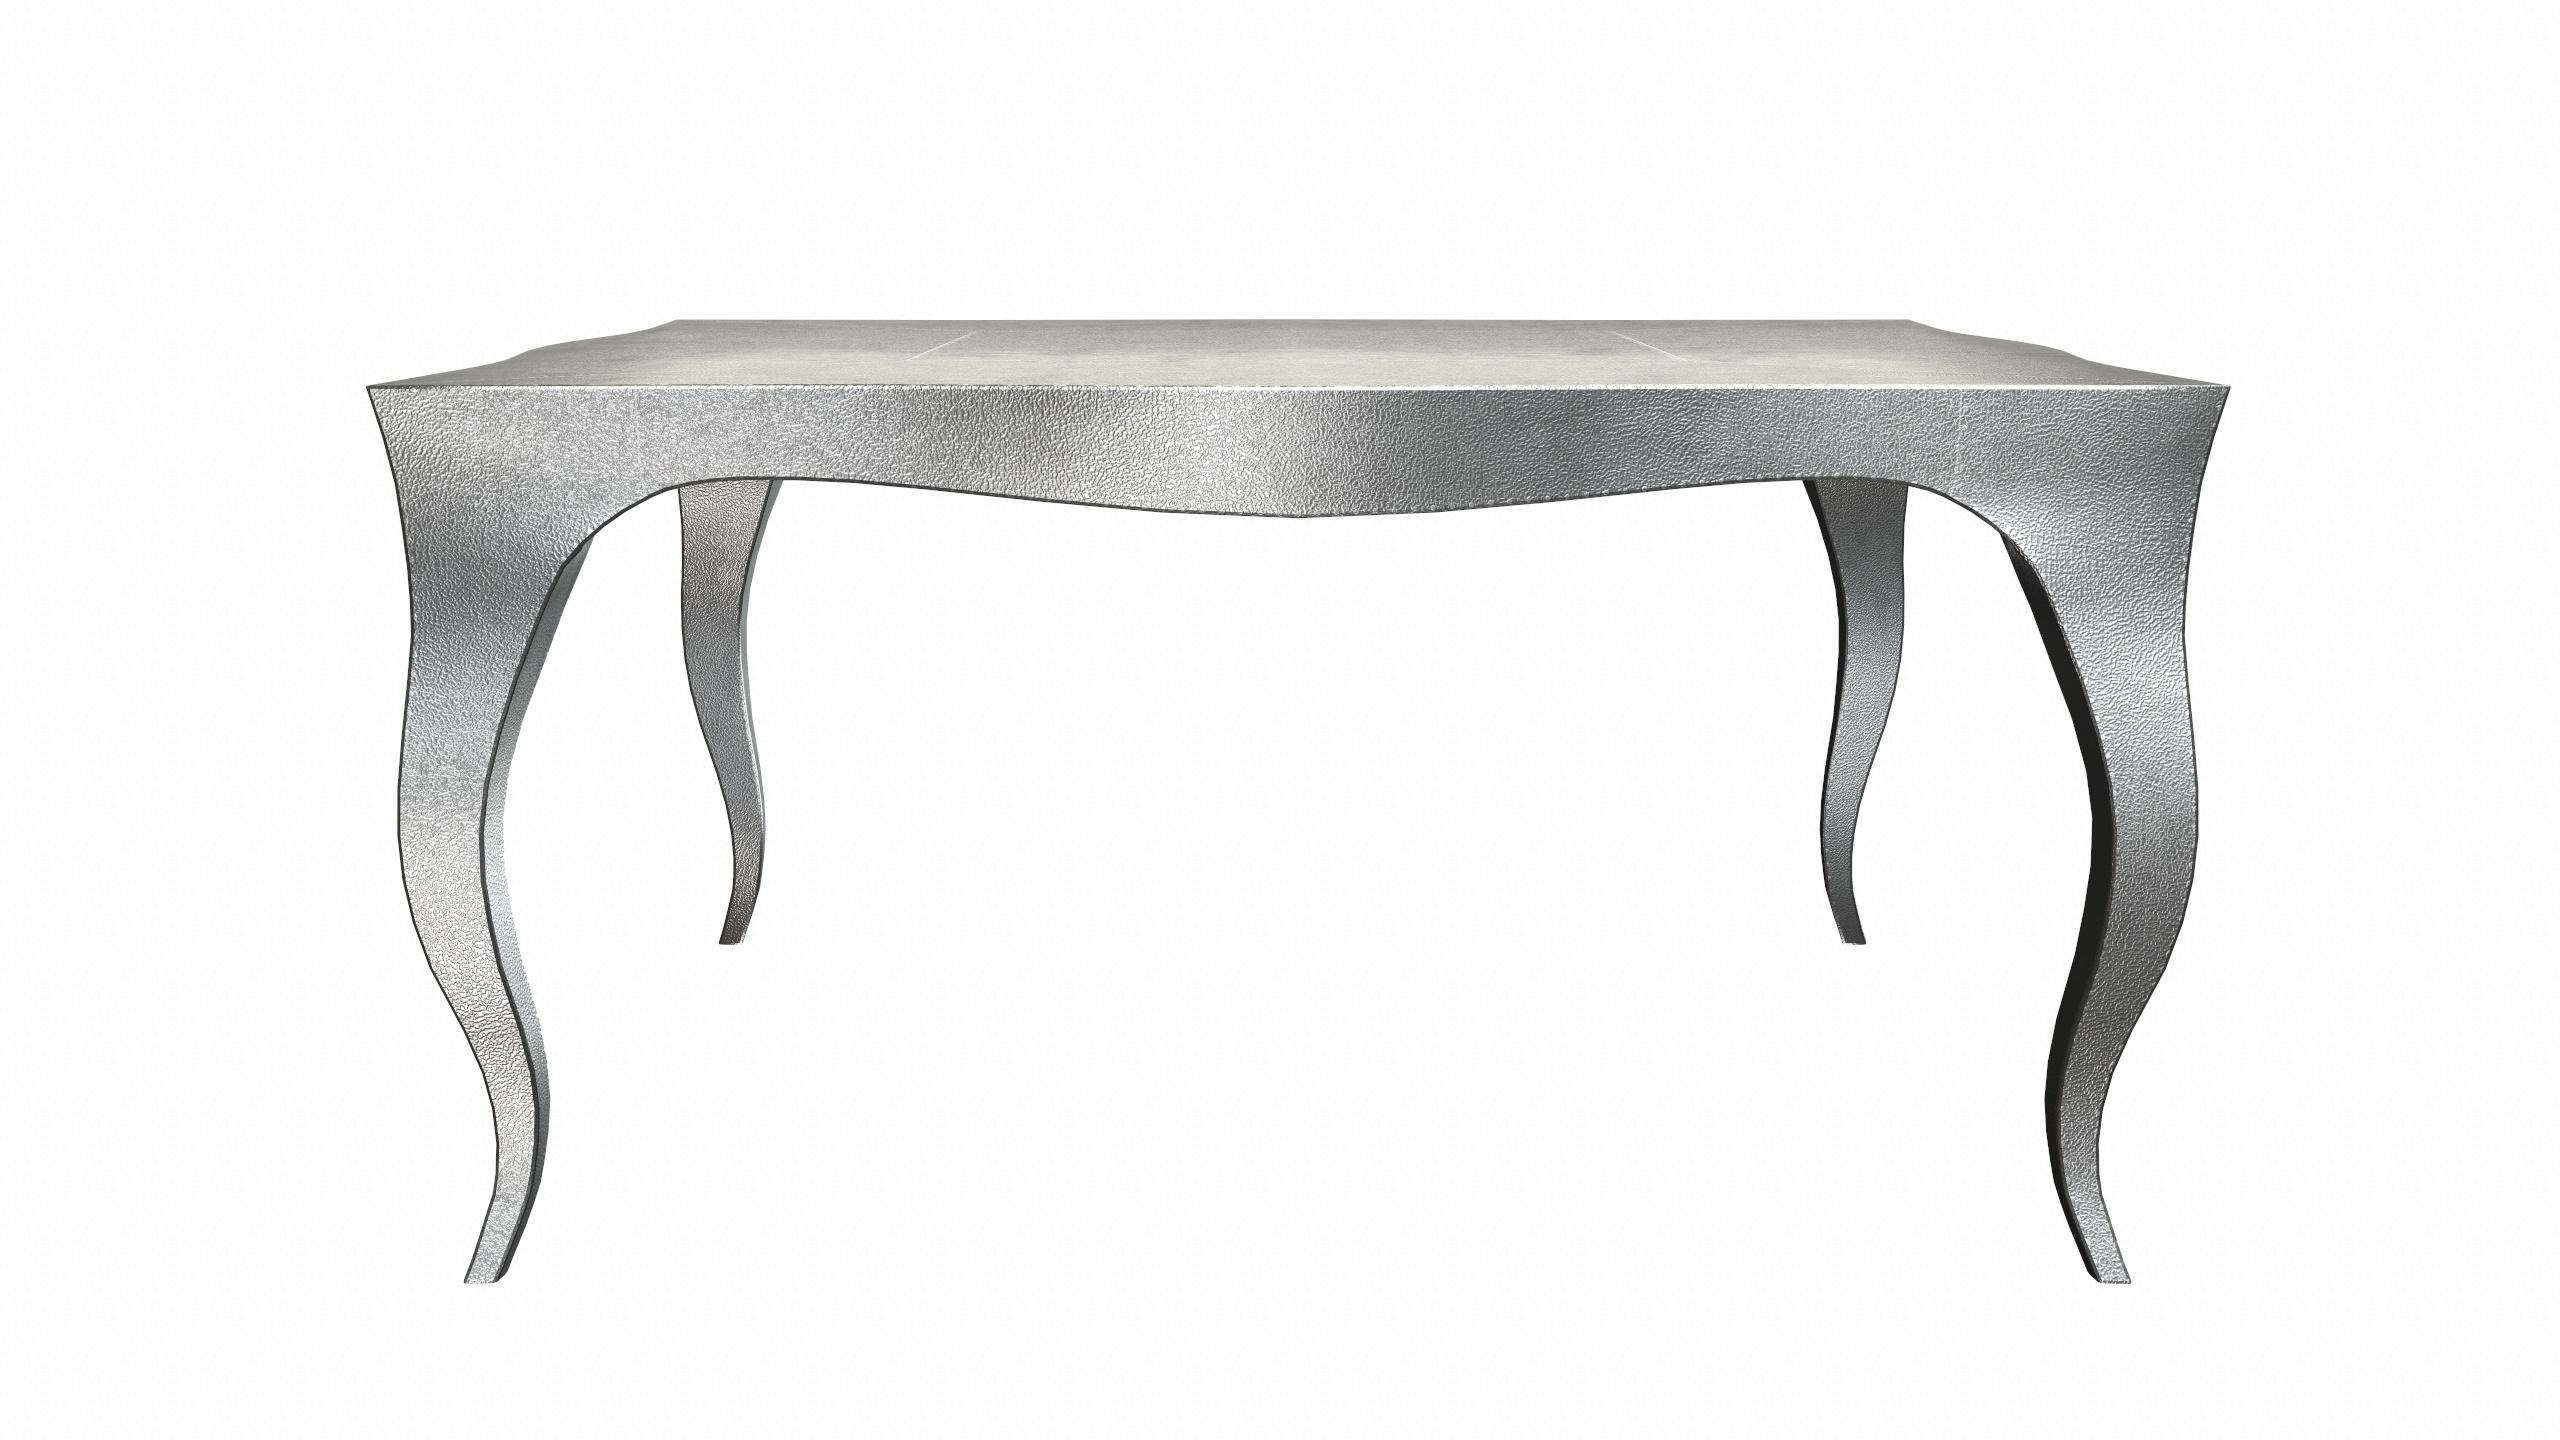 American Louise Art Deco Nesting Tables in Fine Hammered White Bronze 18.5x18.5x10 inch  For Sale